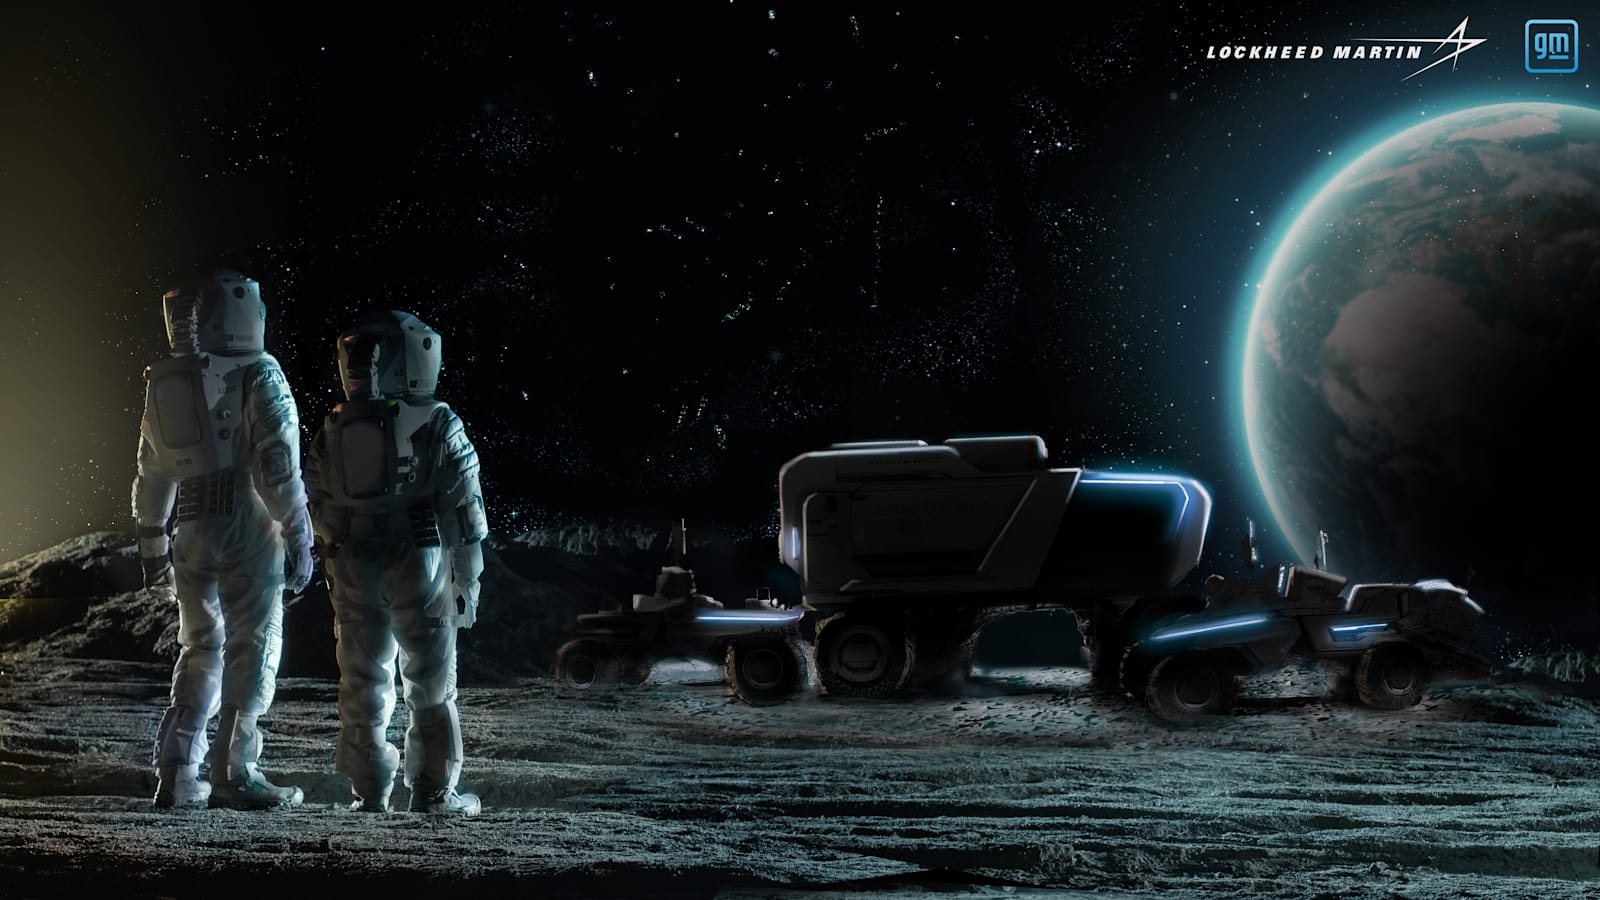 GM to help develop the next generation of lunar vehicles for NASA